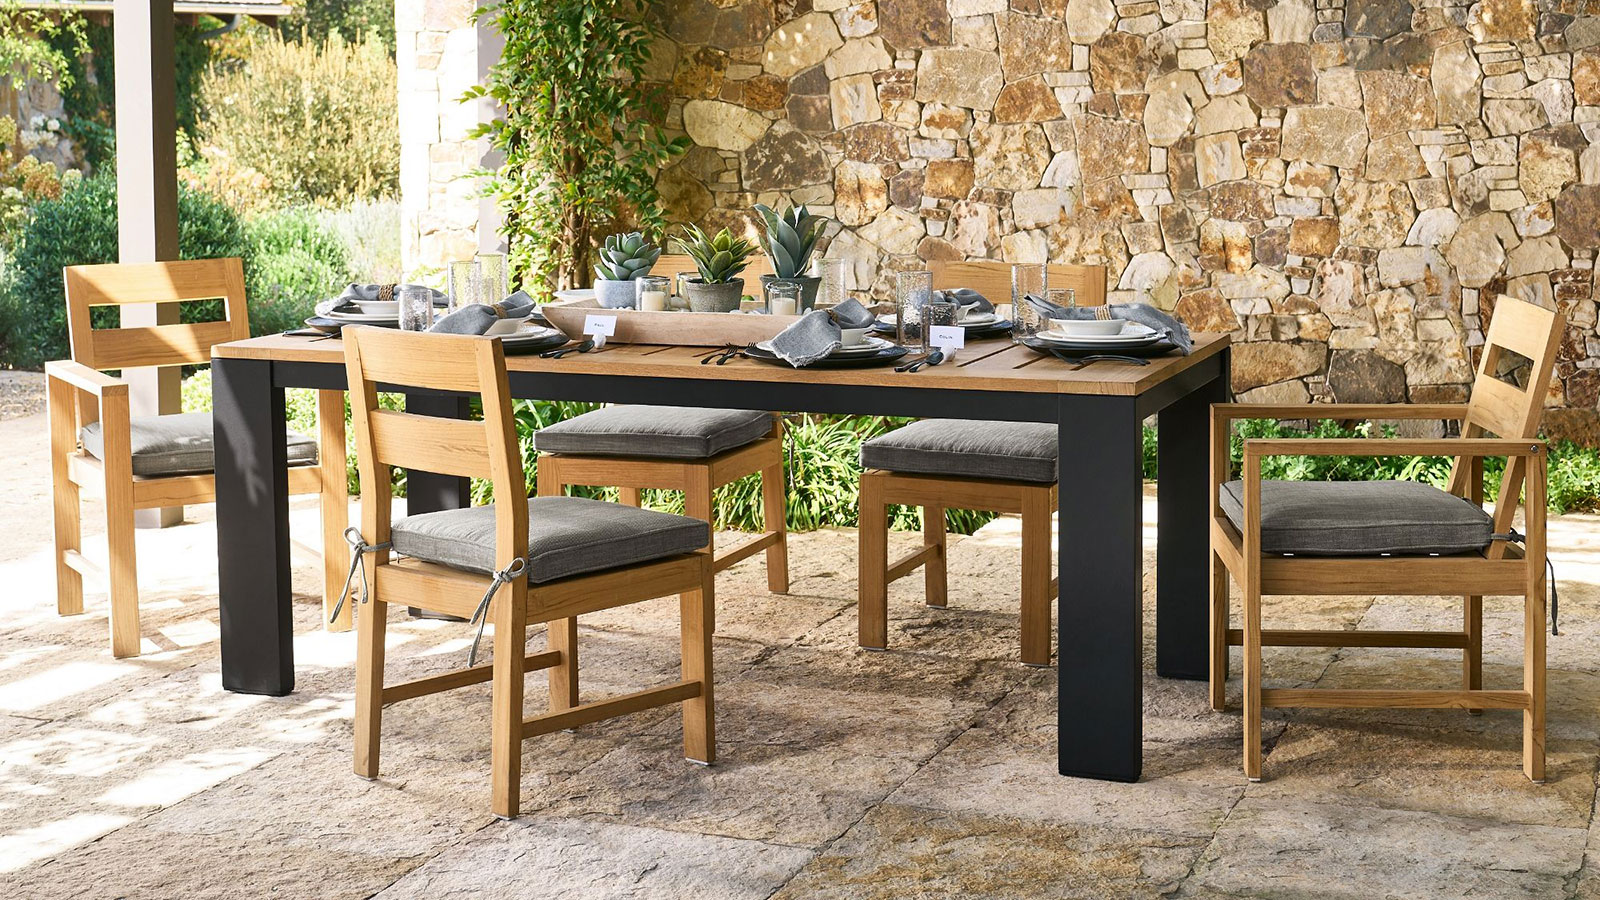 The Best Wood for Outdoor Use & Garden Furniture Projects